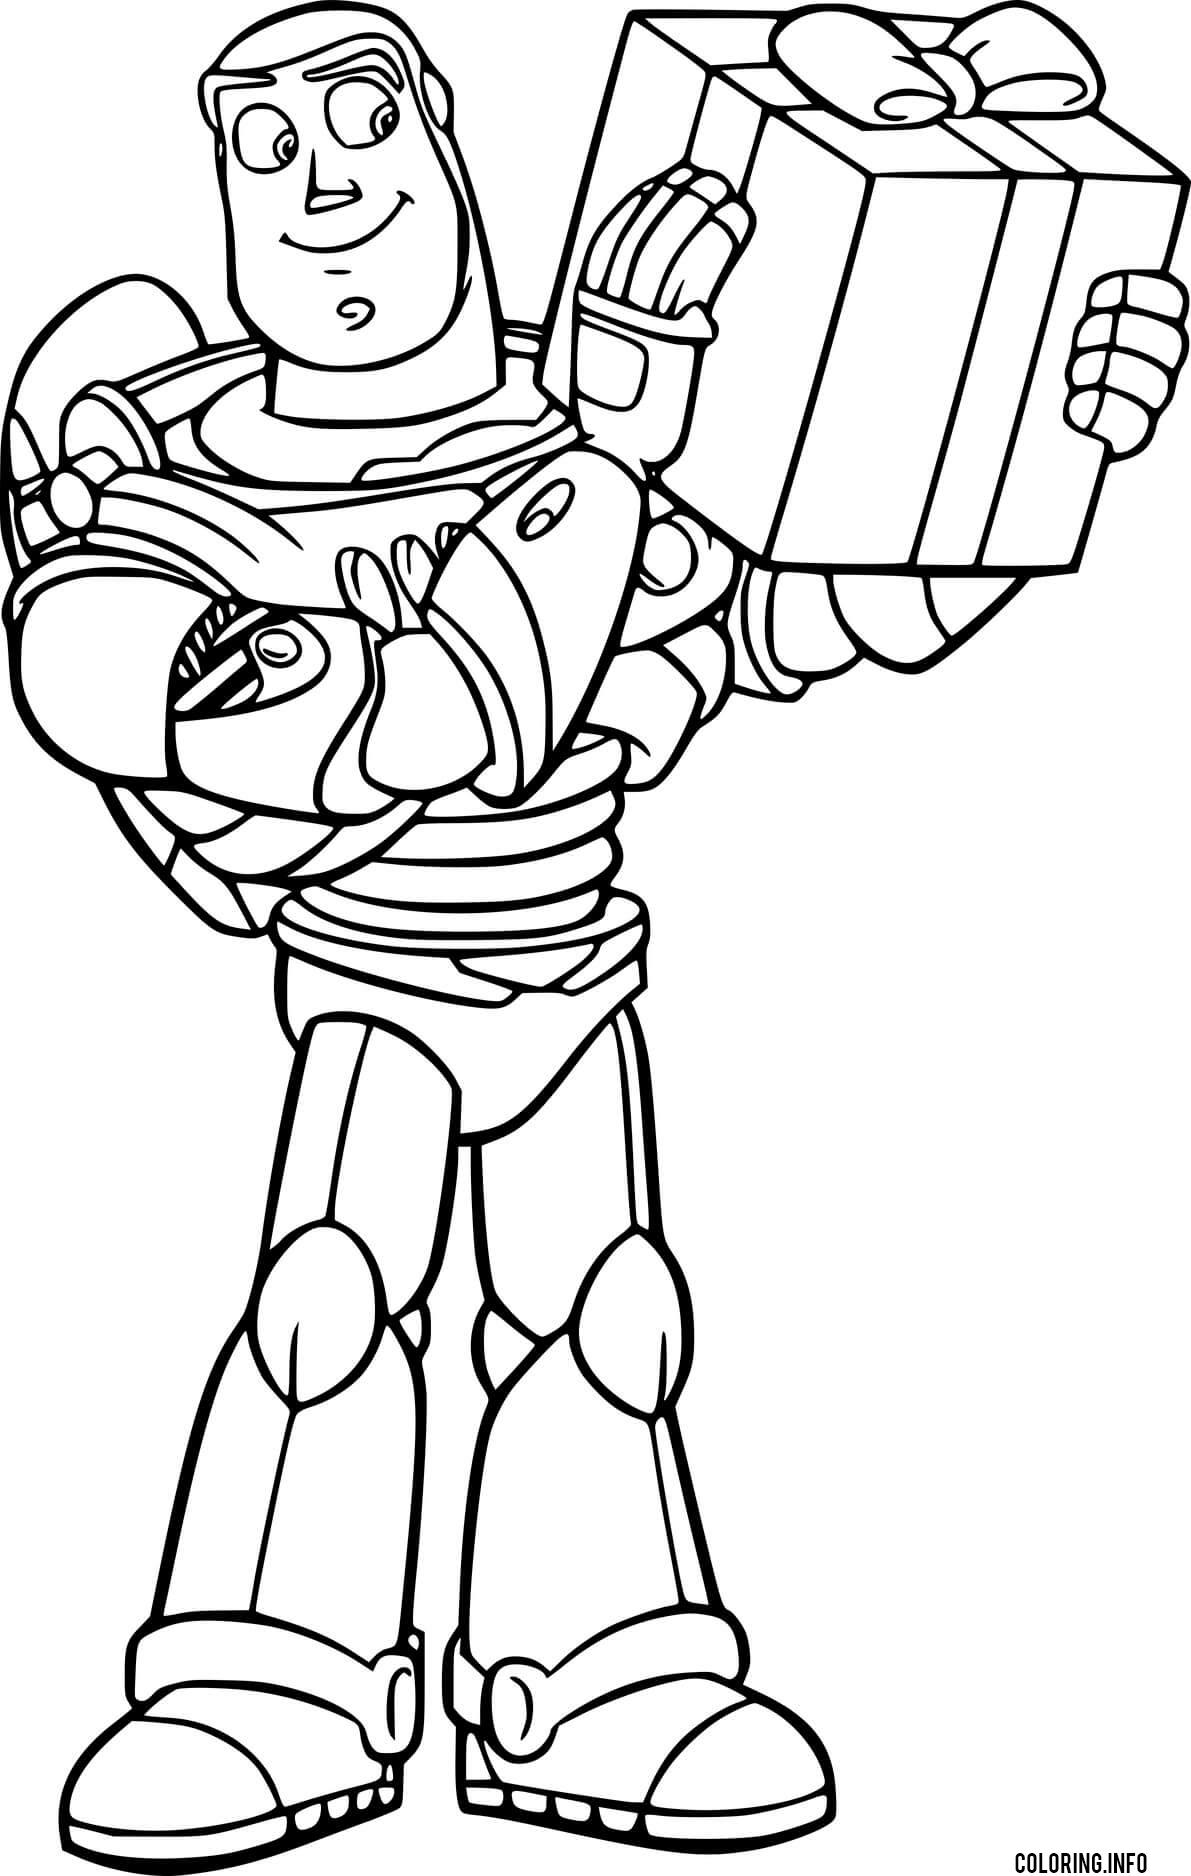 Buzz Lightyear Holds A Gift coloring